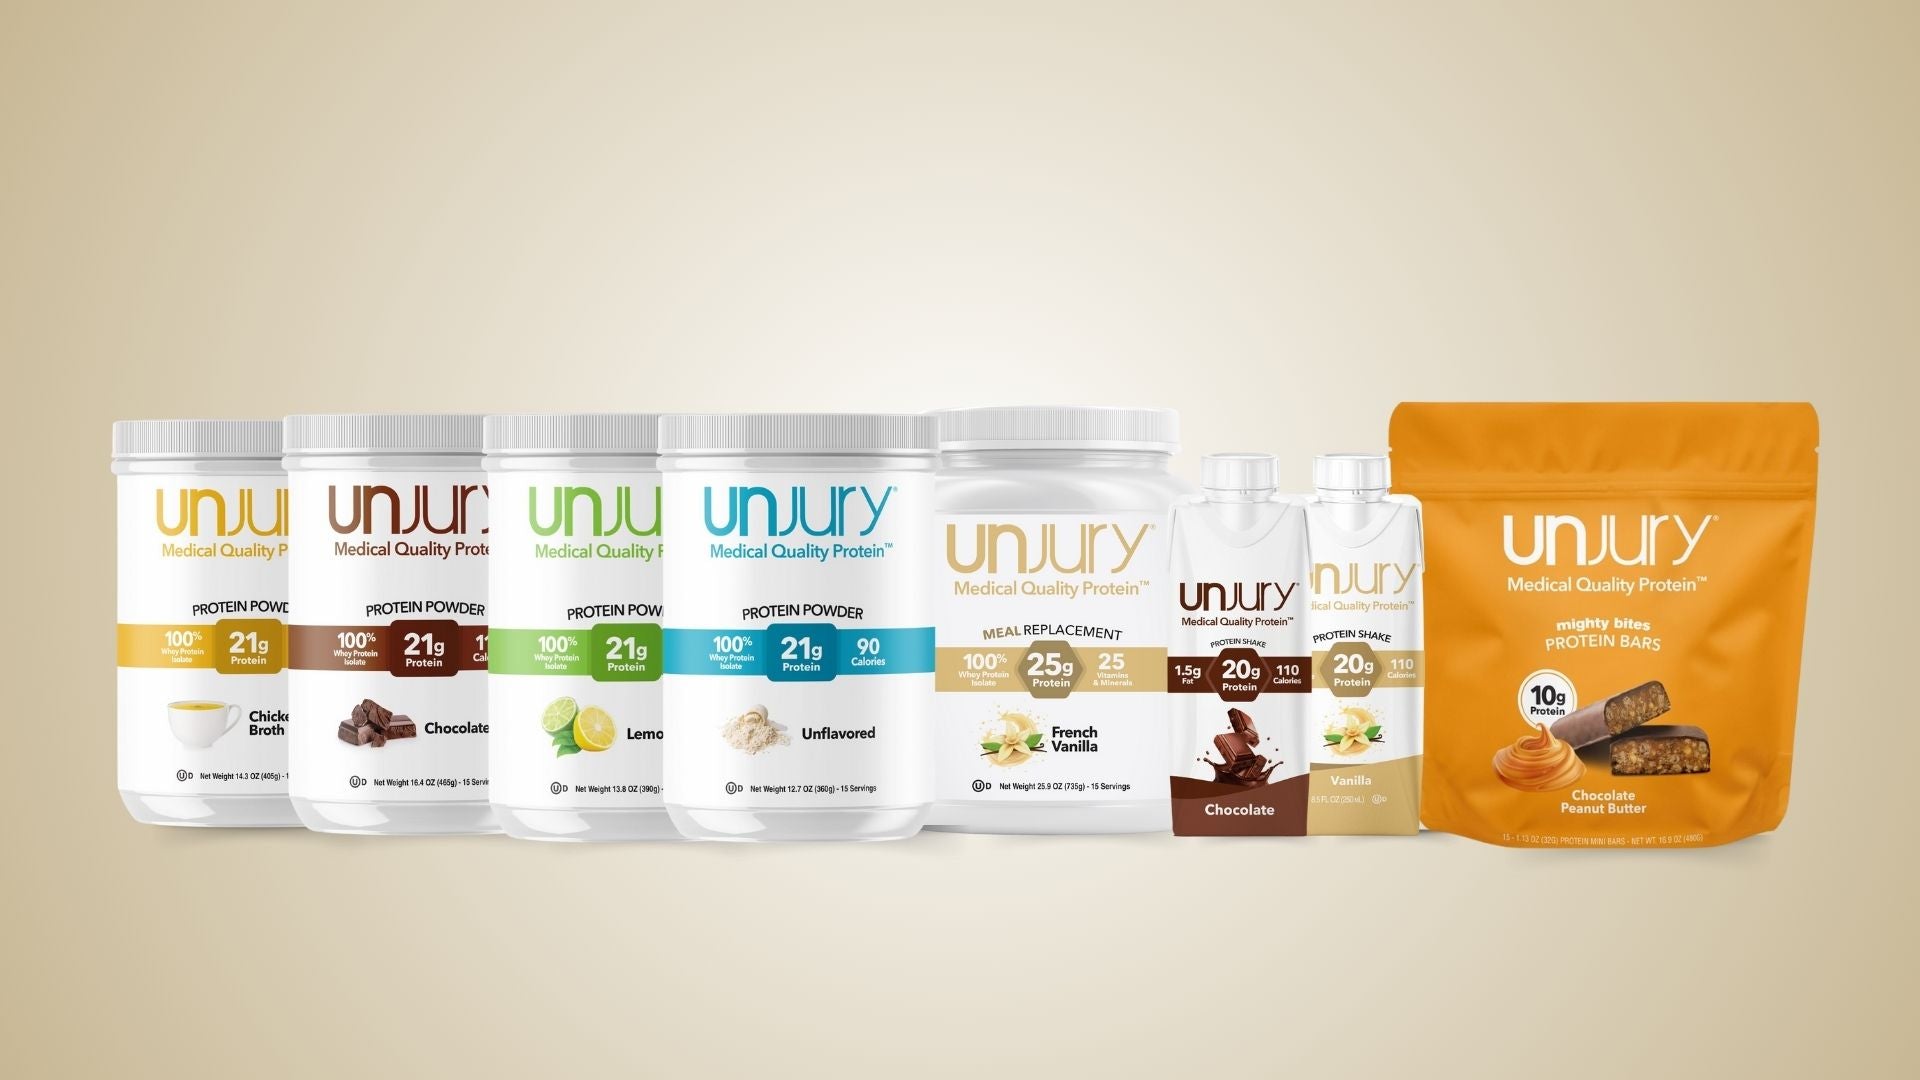 Unjury Protein Powder, ready-to-drink shakes and protein bars.